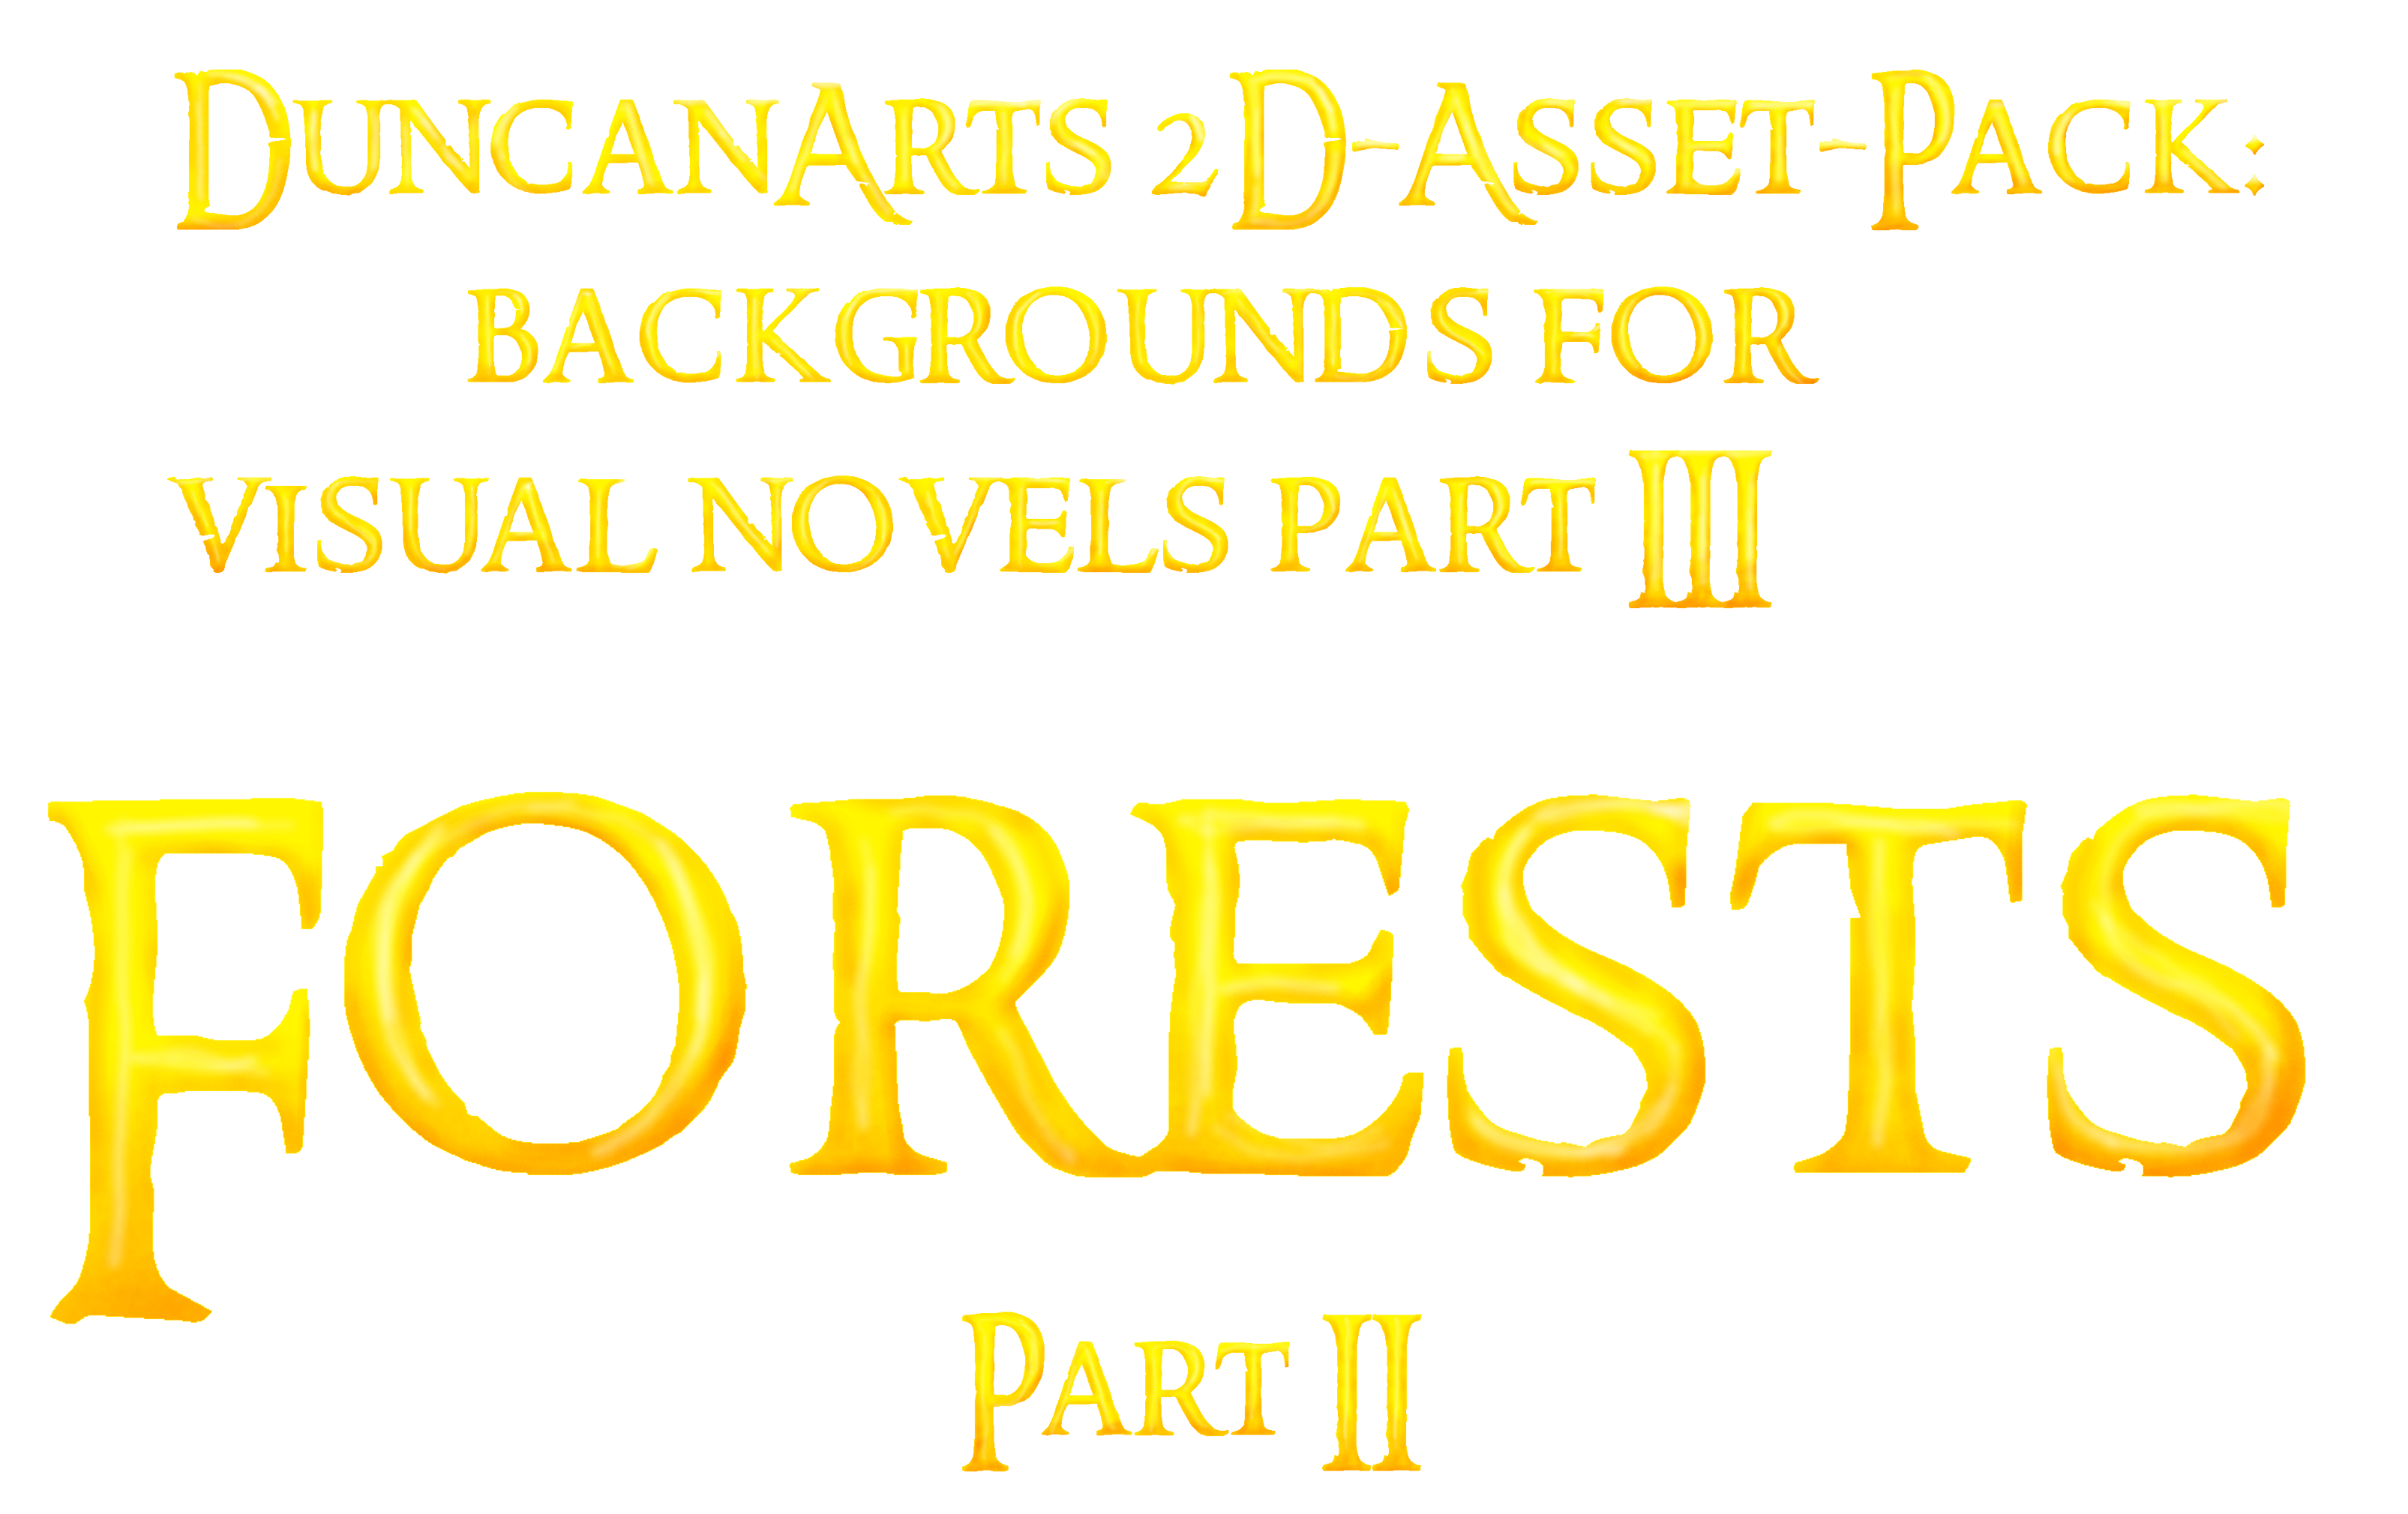 2D-Asset-Pack: backgrounds for visual novels part III: Forests part II